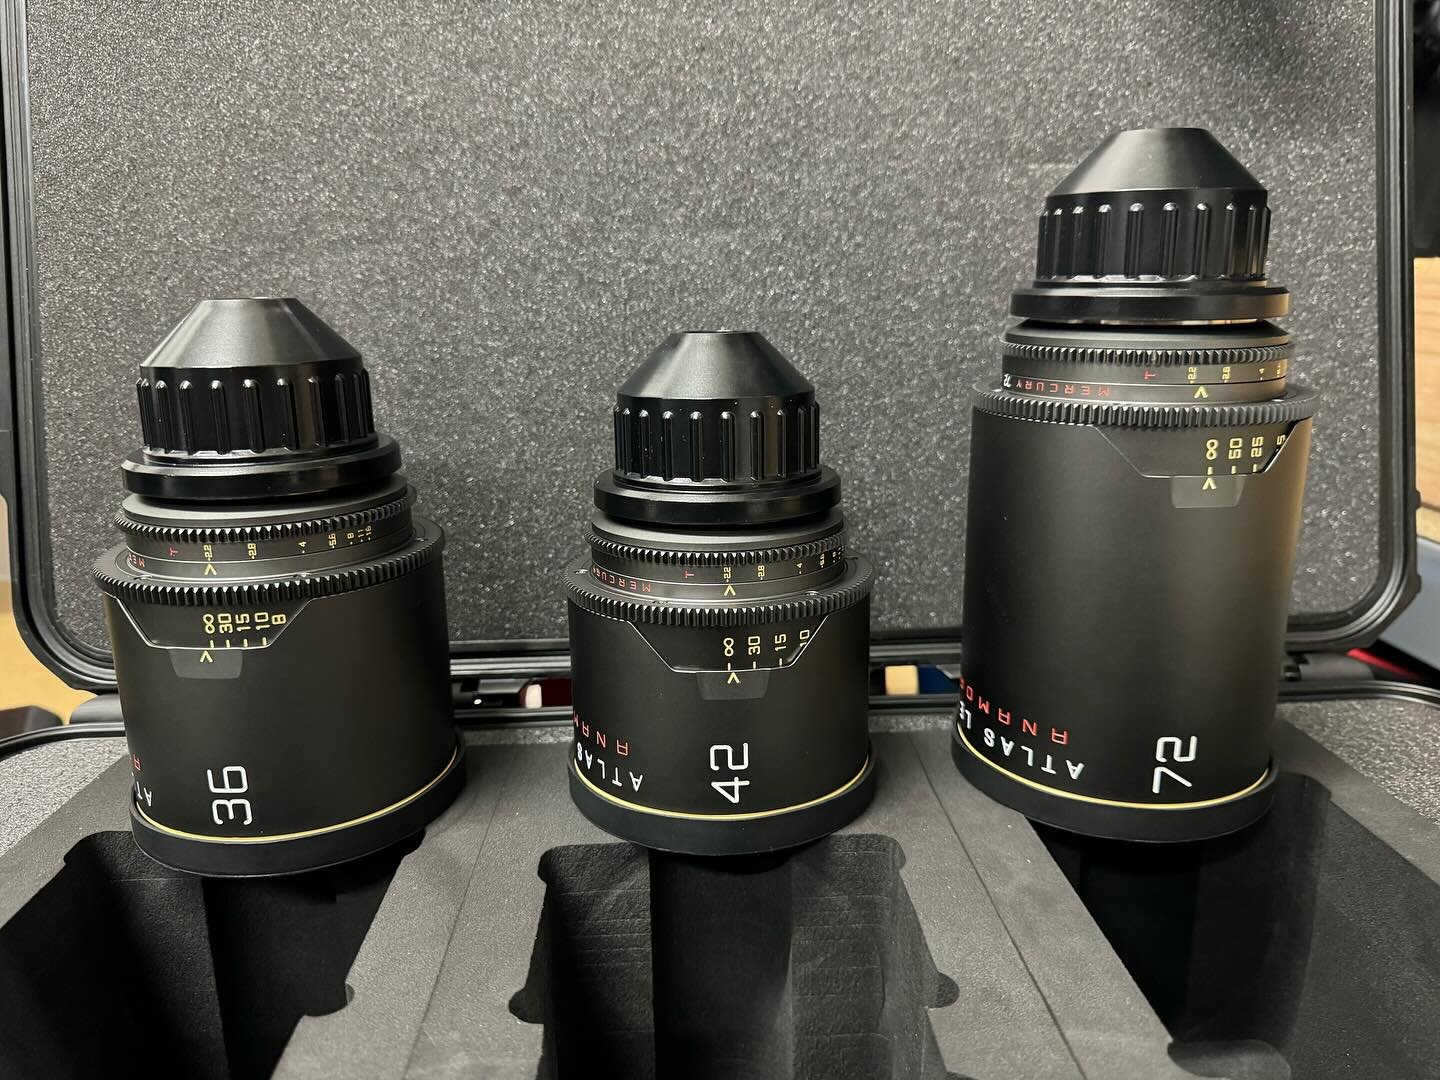 These bad boys finally came.  #AtlasMercury #Anamorphic #Lenses. Thank you to @atlaslensco for getting to us before our shoot next week! 

#cinematography #atlaslensco #atlasanamorphic #cinematographer #lenses #cinemascope #filmmaking #directorofphot